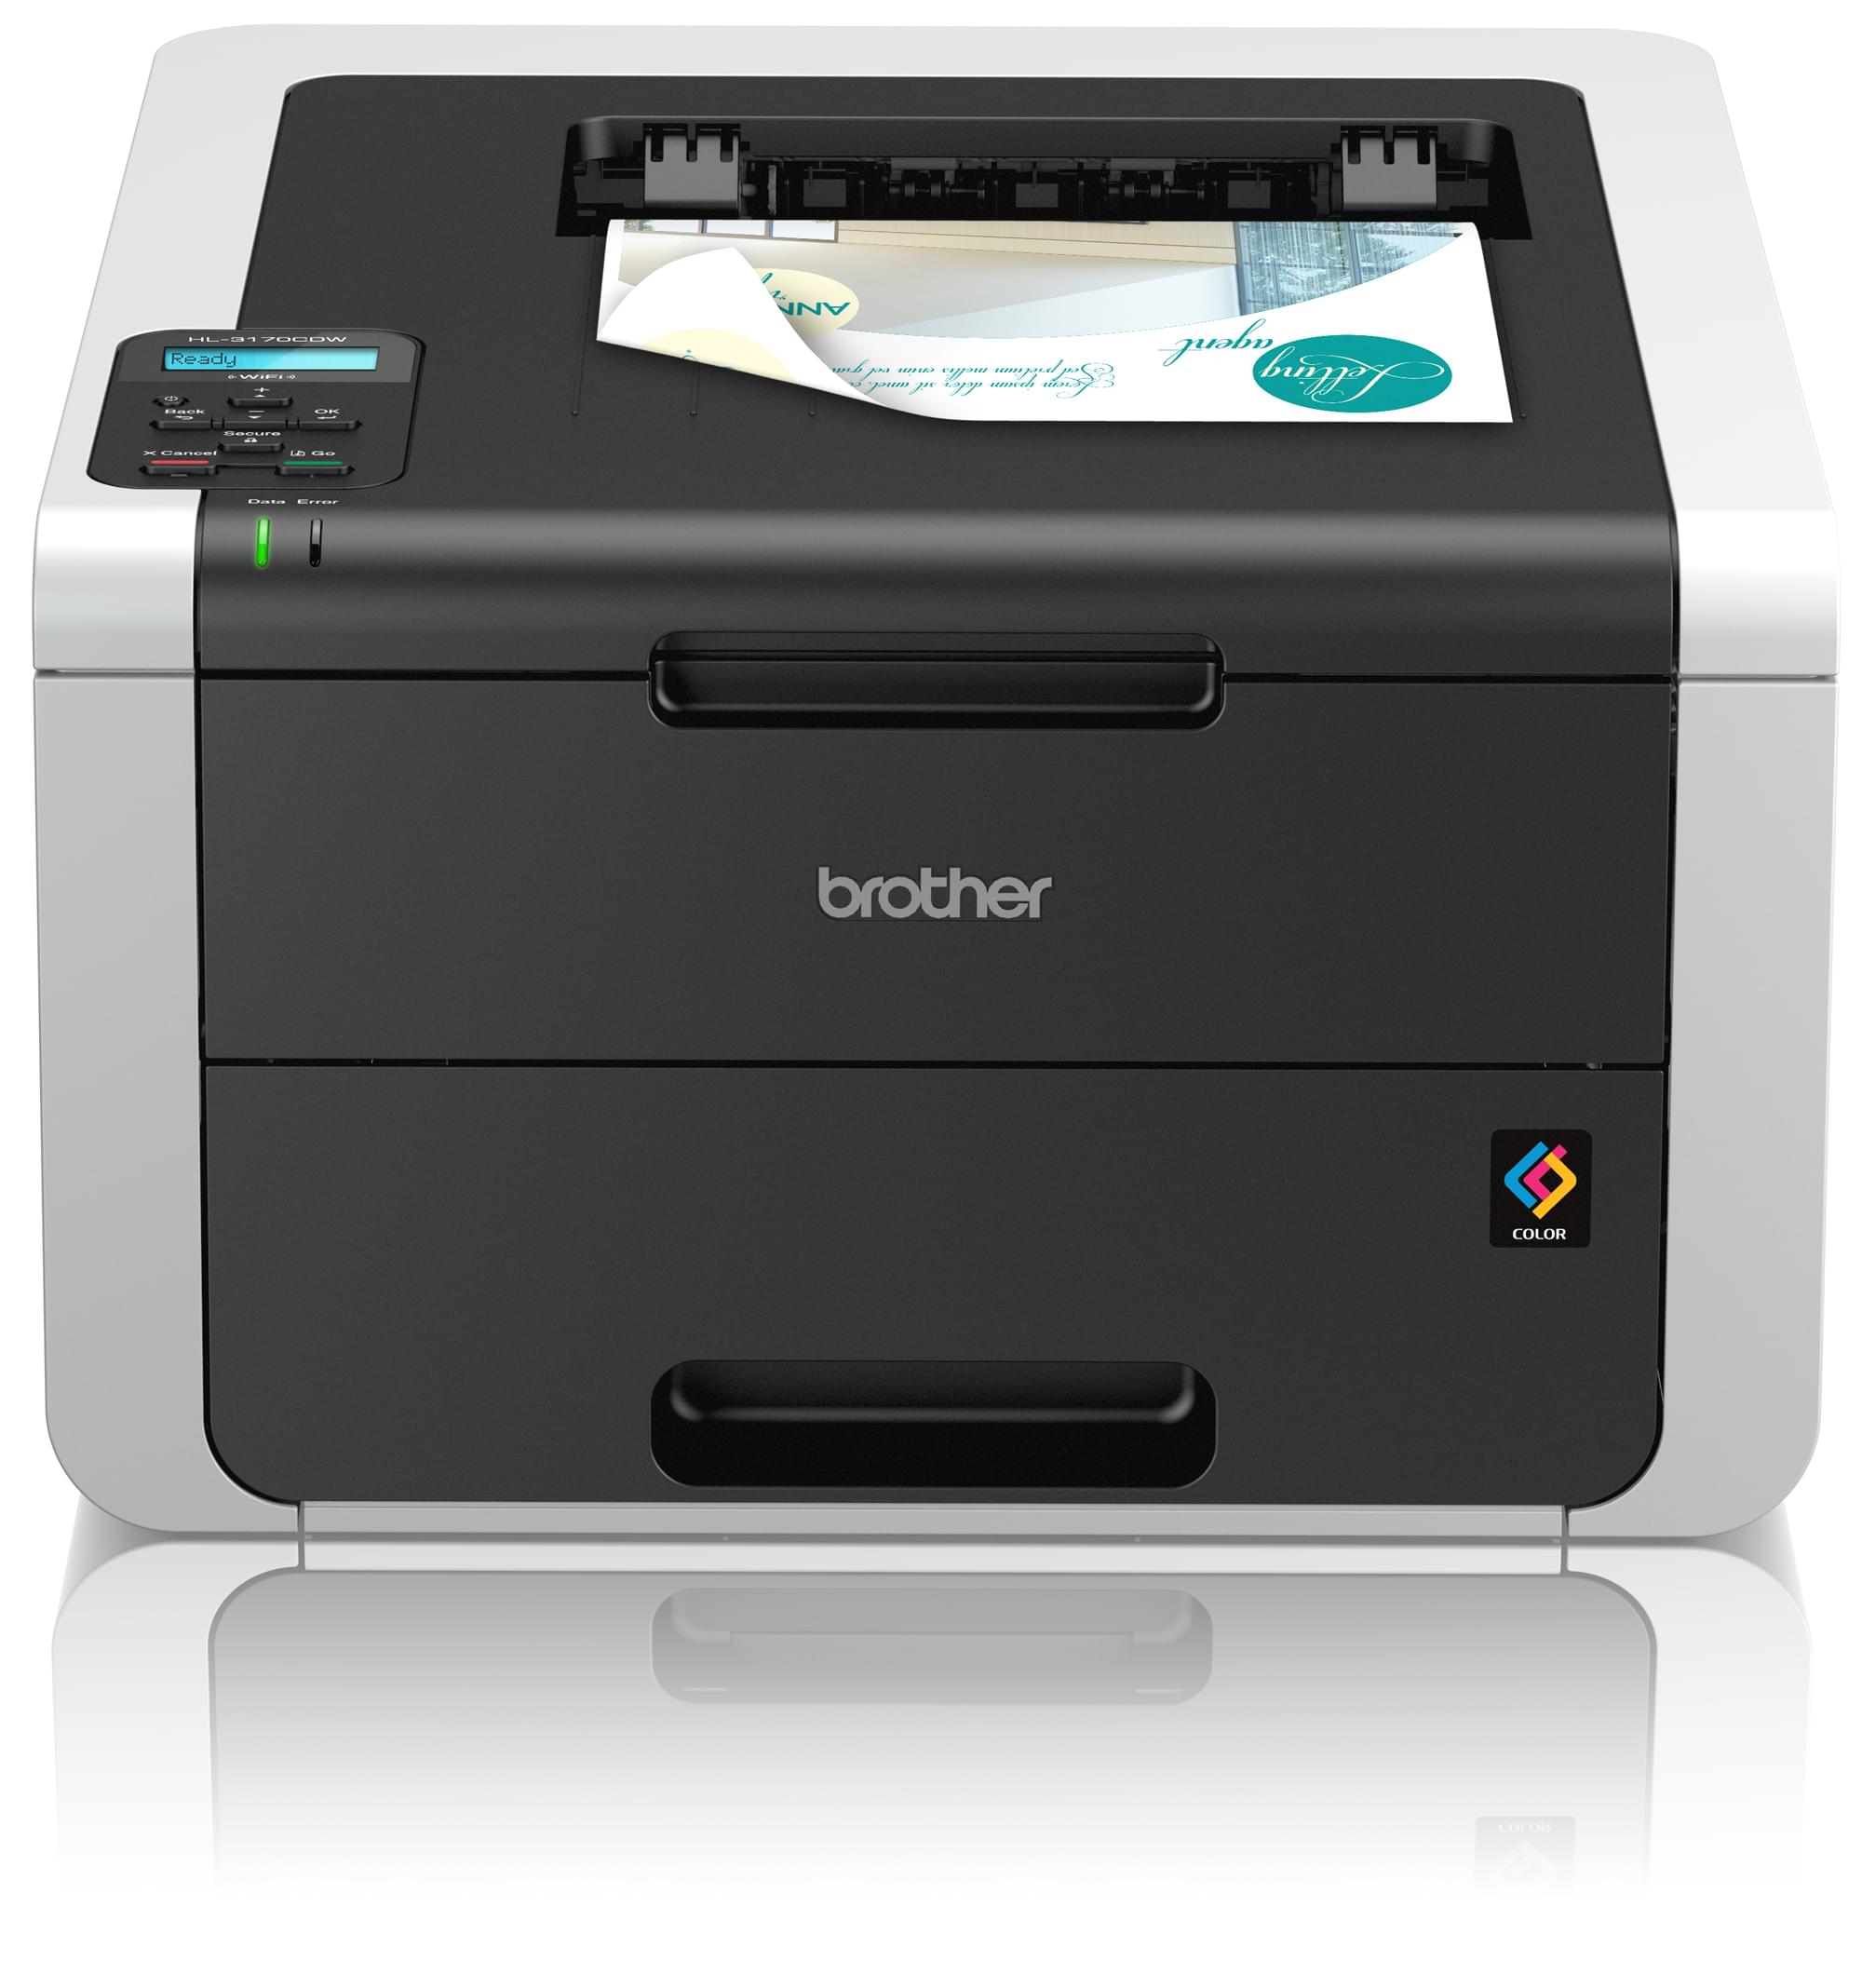 Brother Imprimante Brother HL 3170CDW (HL3170CDWRF1) - Achat / Vente ...